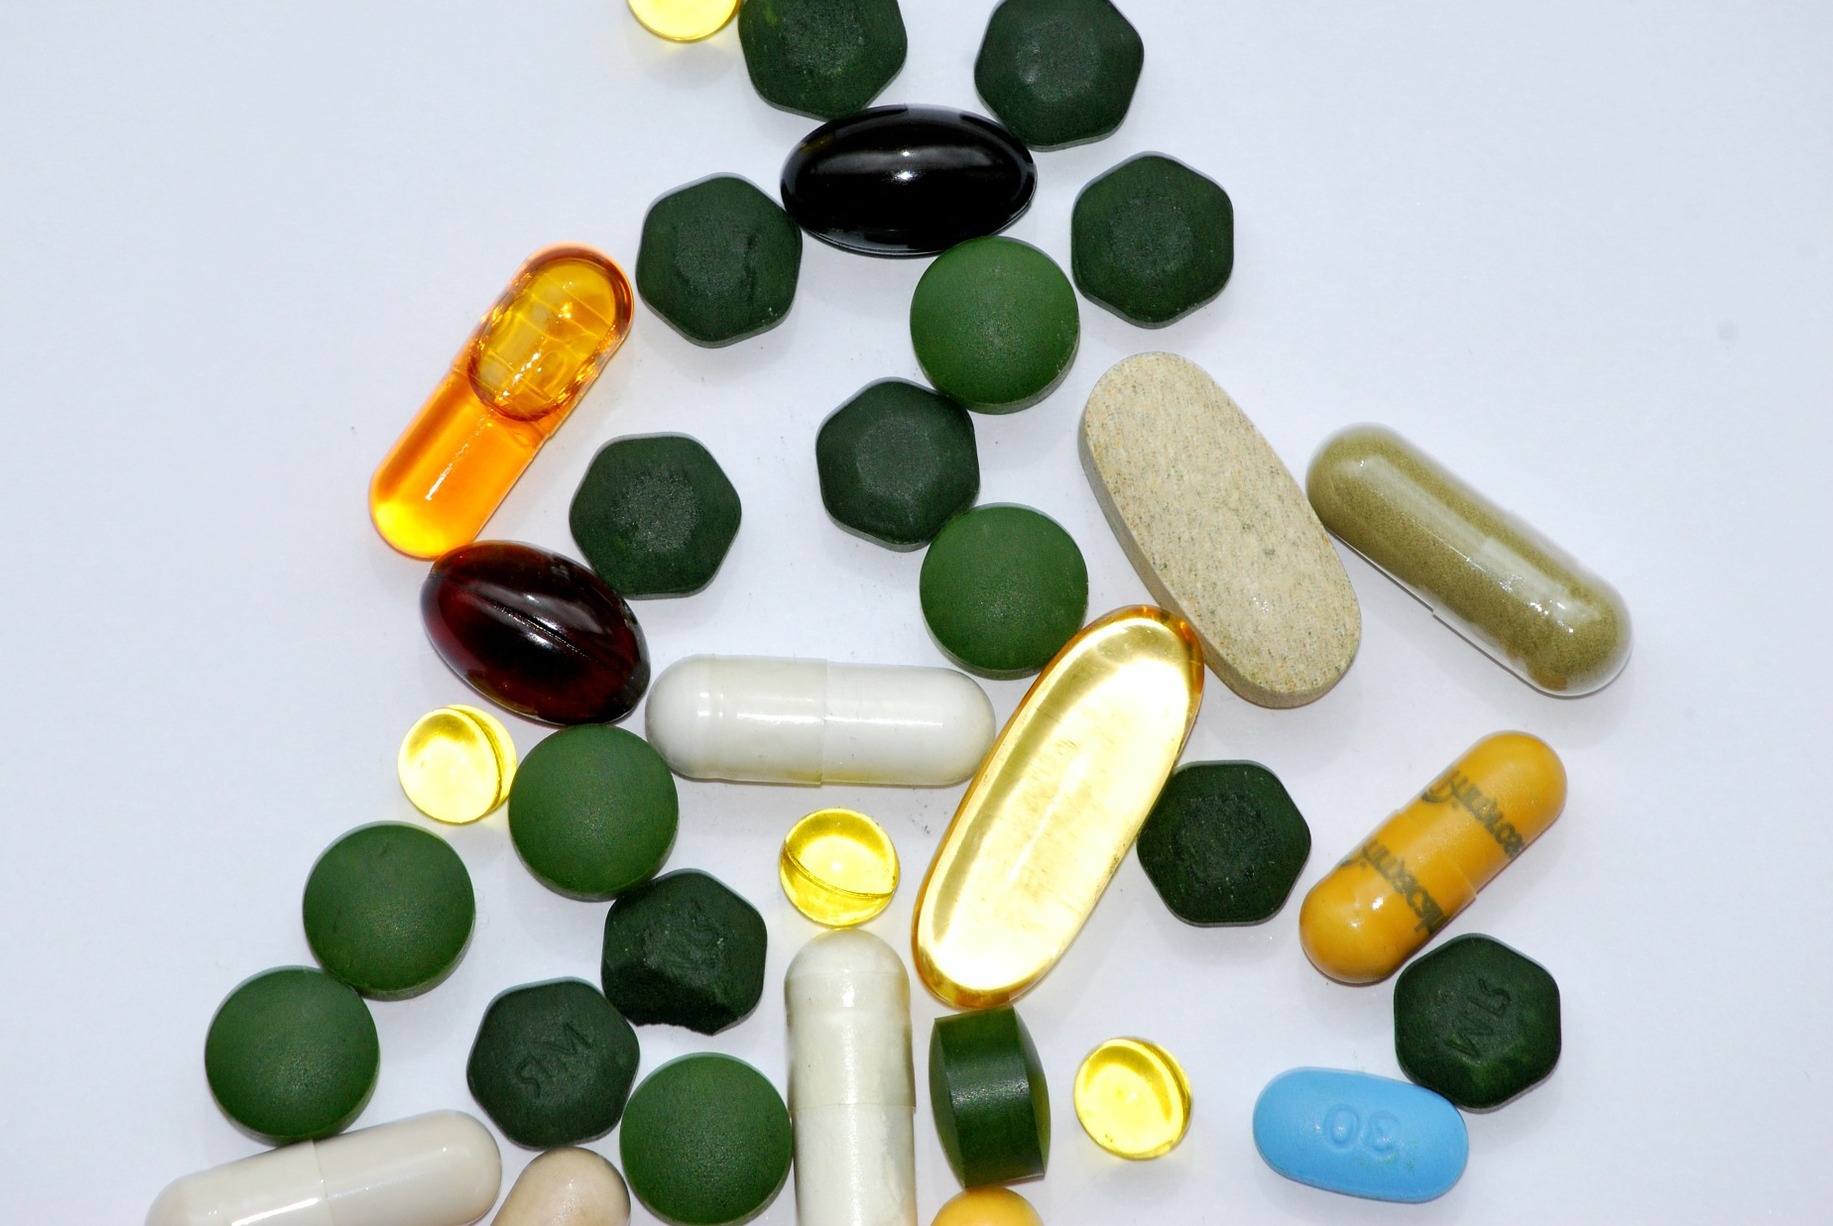 Why Take Supplements?